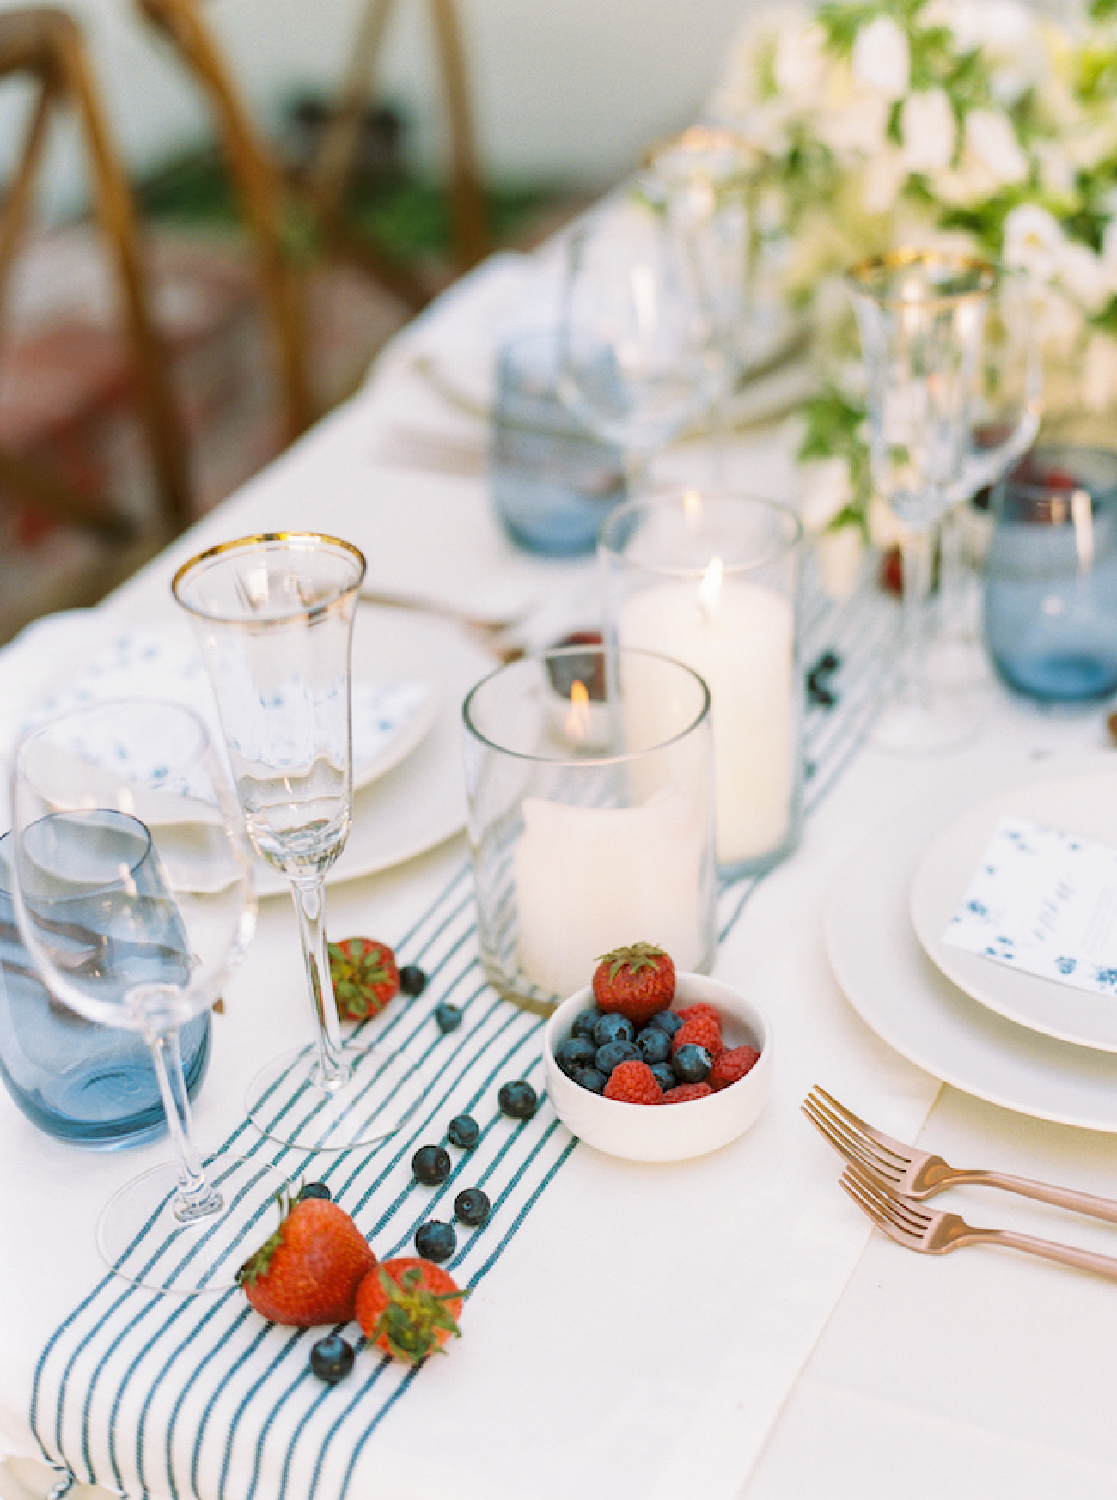 Simple red white and blue 4th of July tablescape - Inspired By This. #tablescapes #patrioticdecor #4thofjuly #independencedayparty